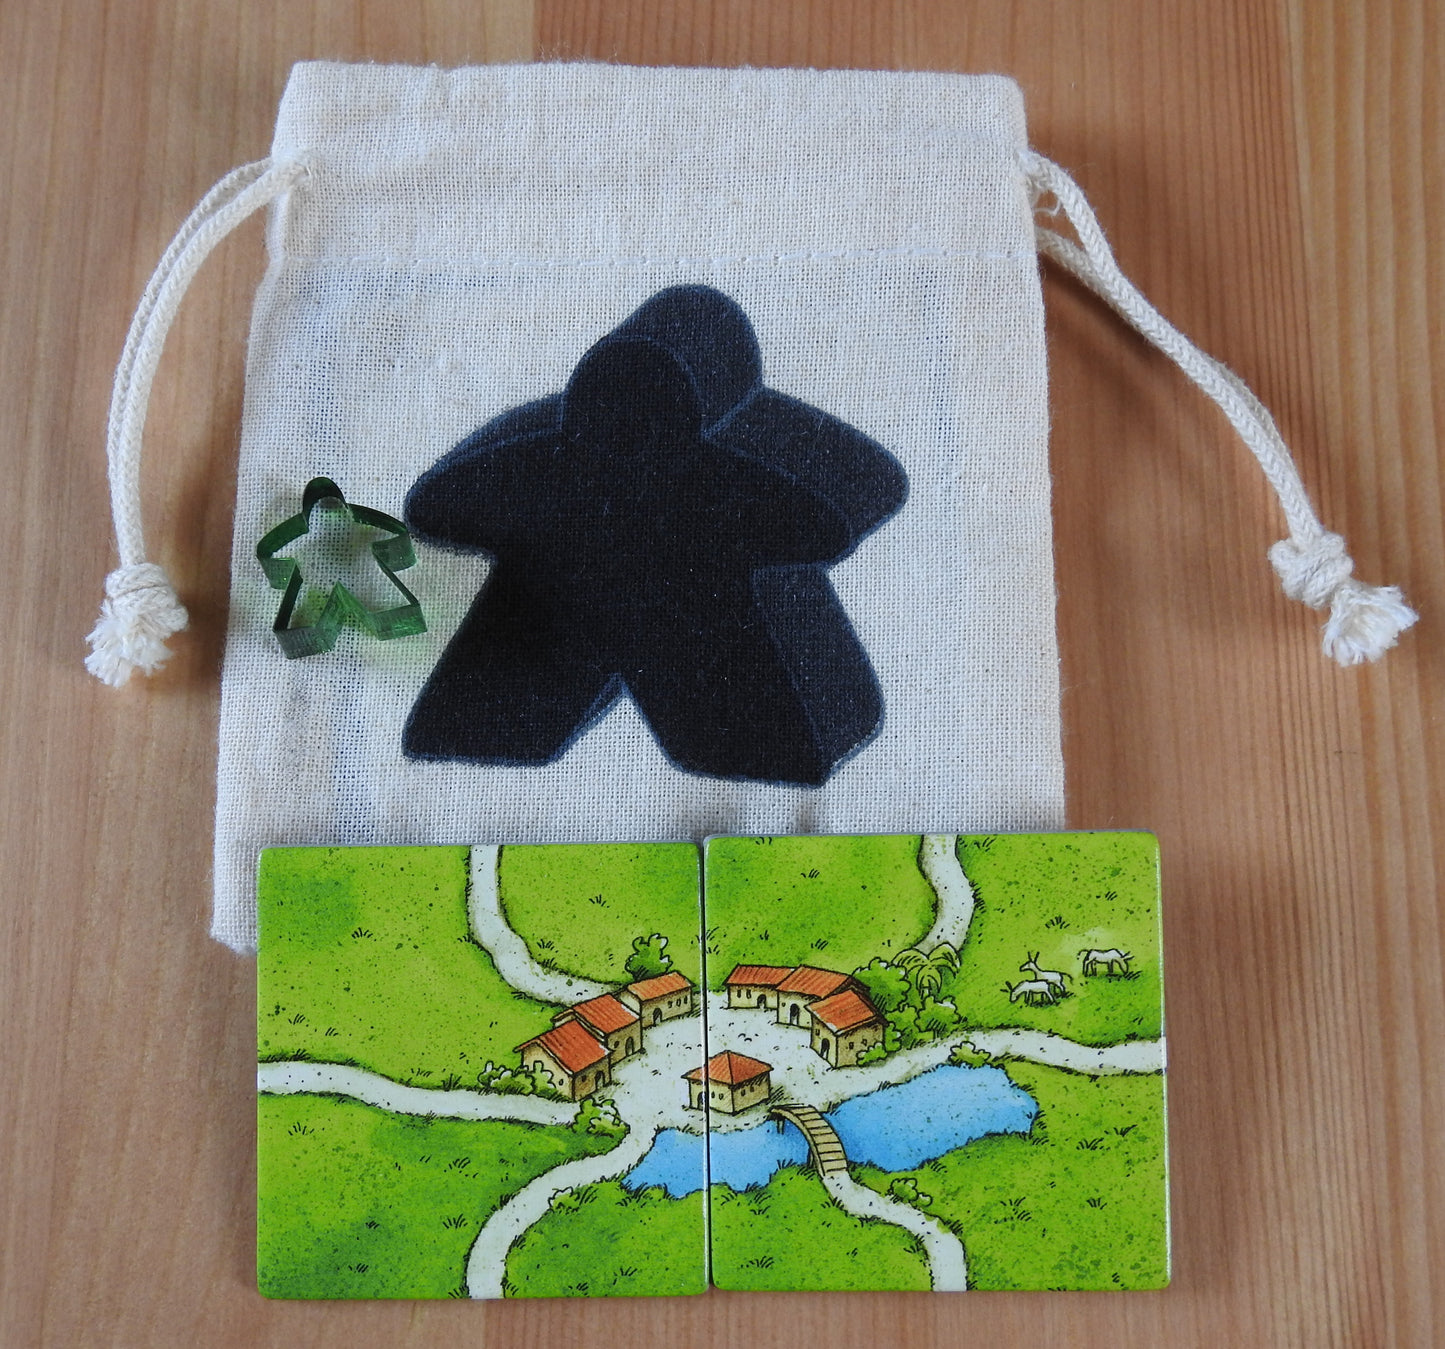 Close-up of the black meeple bag, green meeple teacher and 2 tiles.